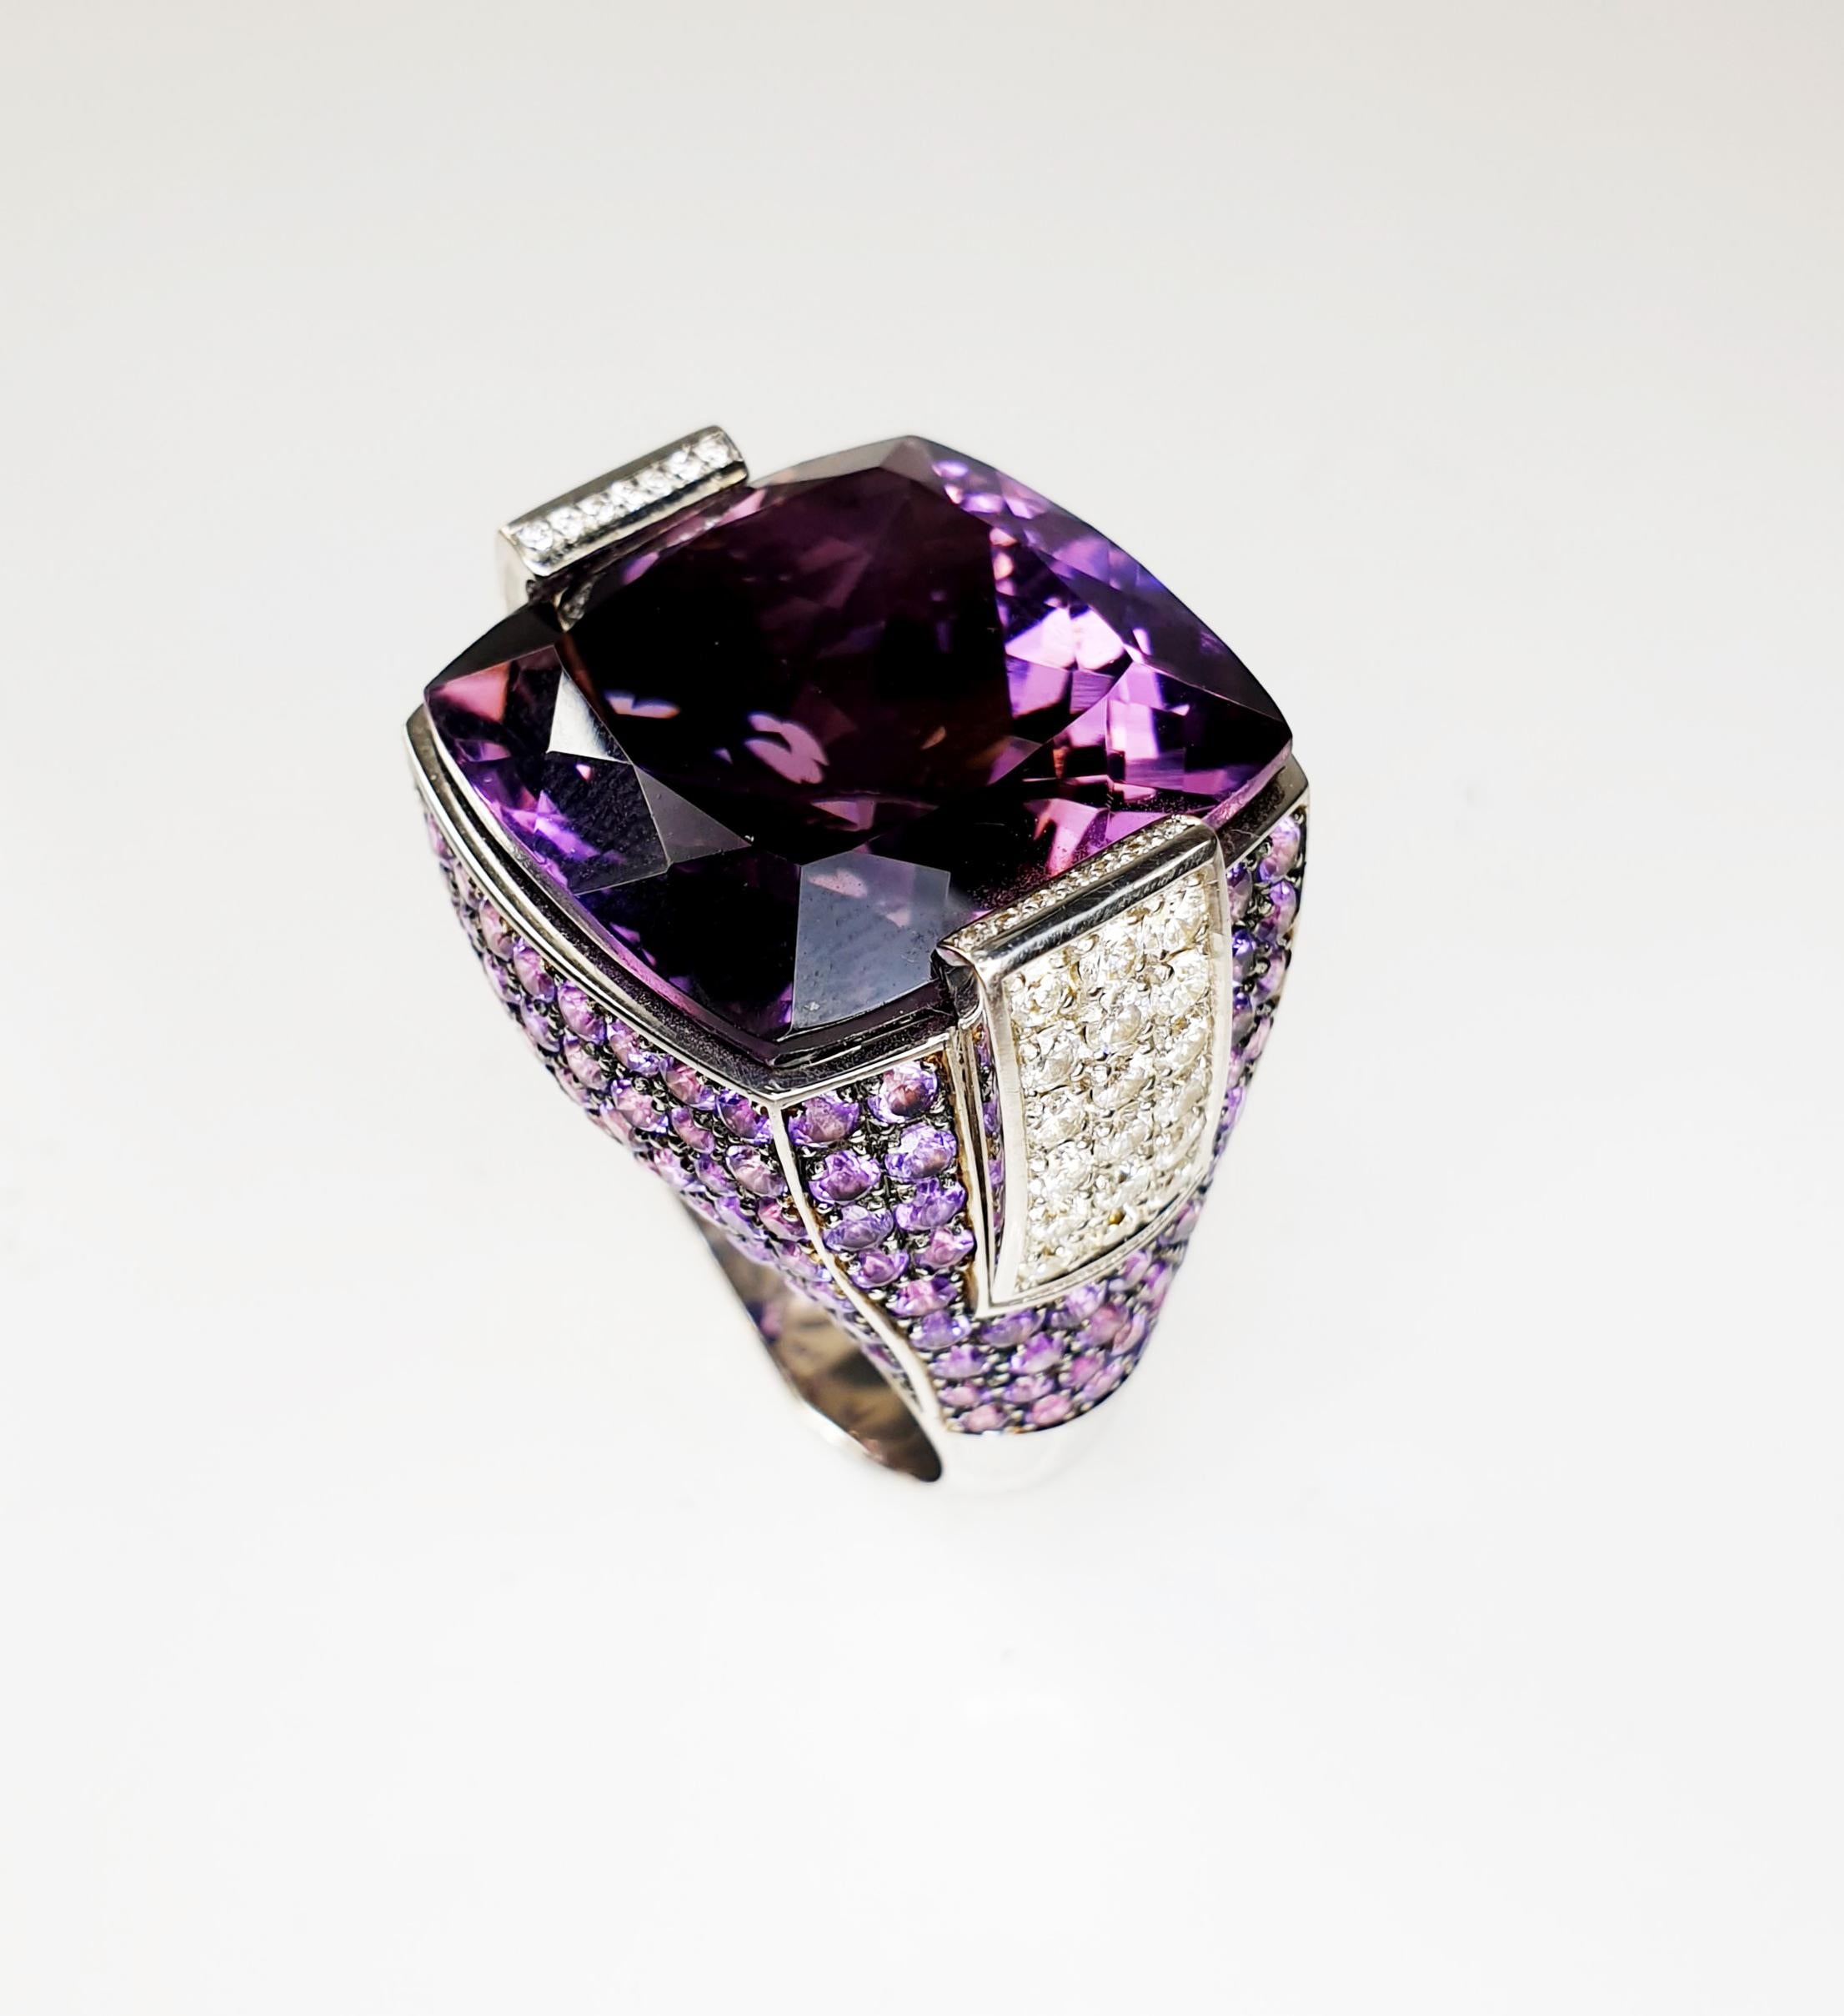 Multifaceted 35ct amethyst with Diamonds and 18k white gold ring
Irama Pradera is a vdynamic and outgoing designer from Spain that searches always for the best gems and combines classic with contemporary mounting and styles.
Amethyst is a natural